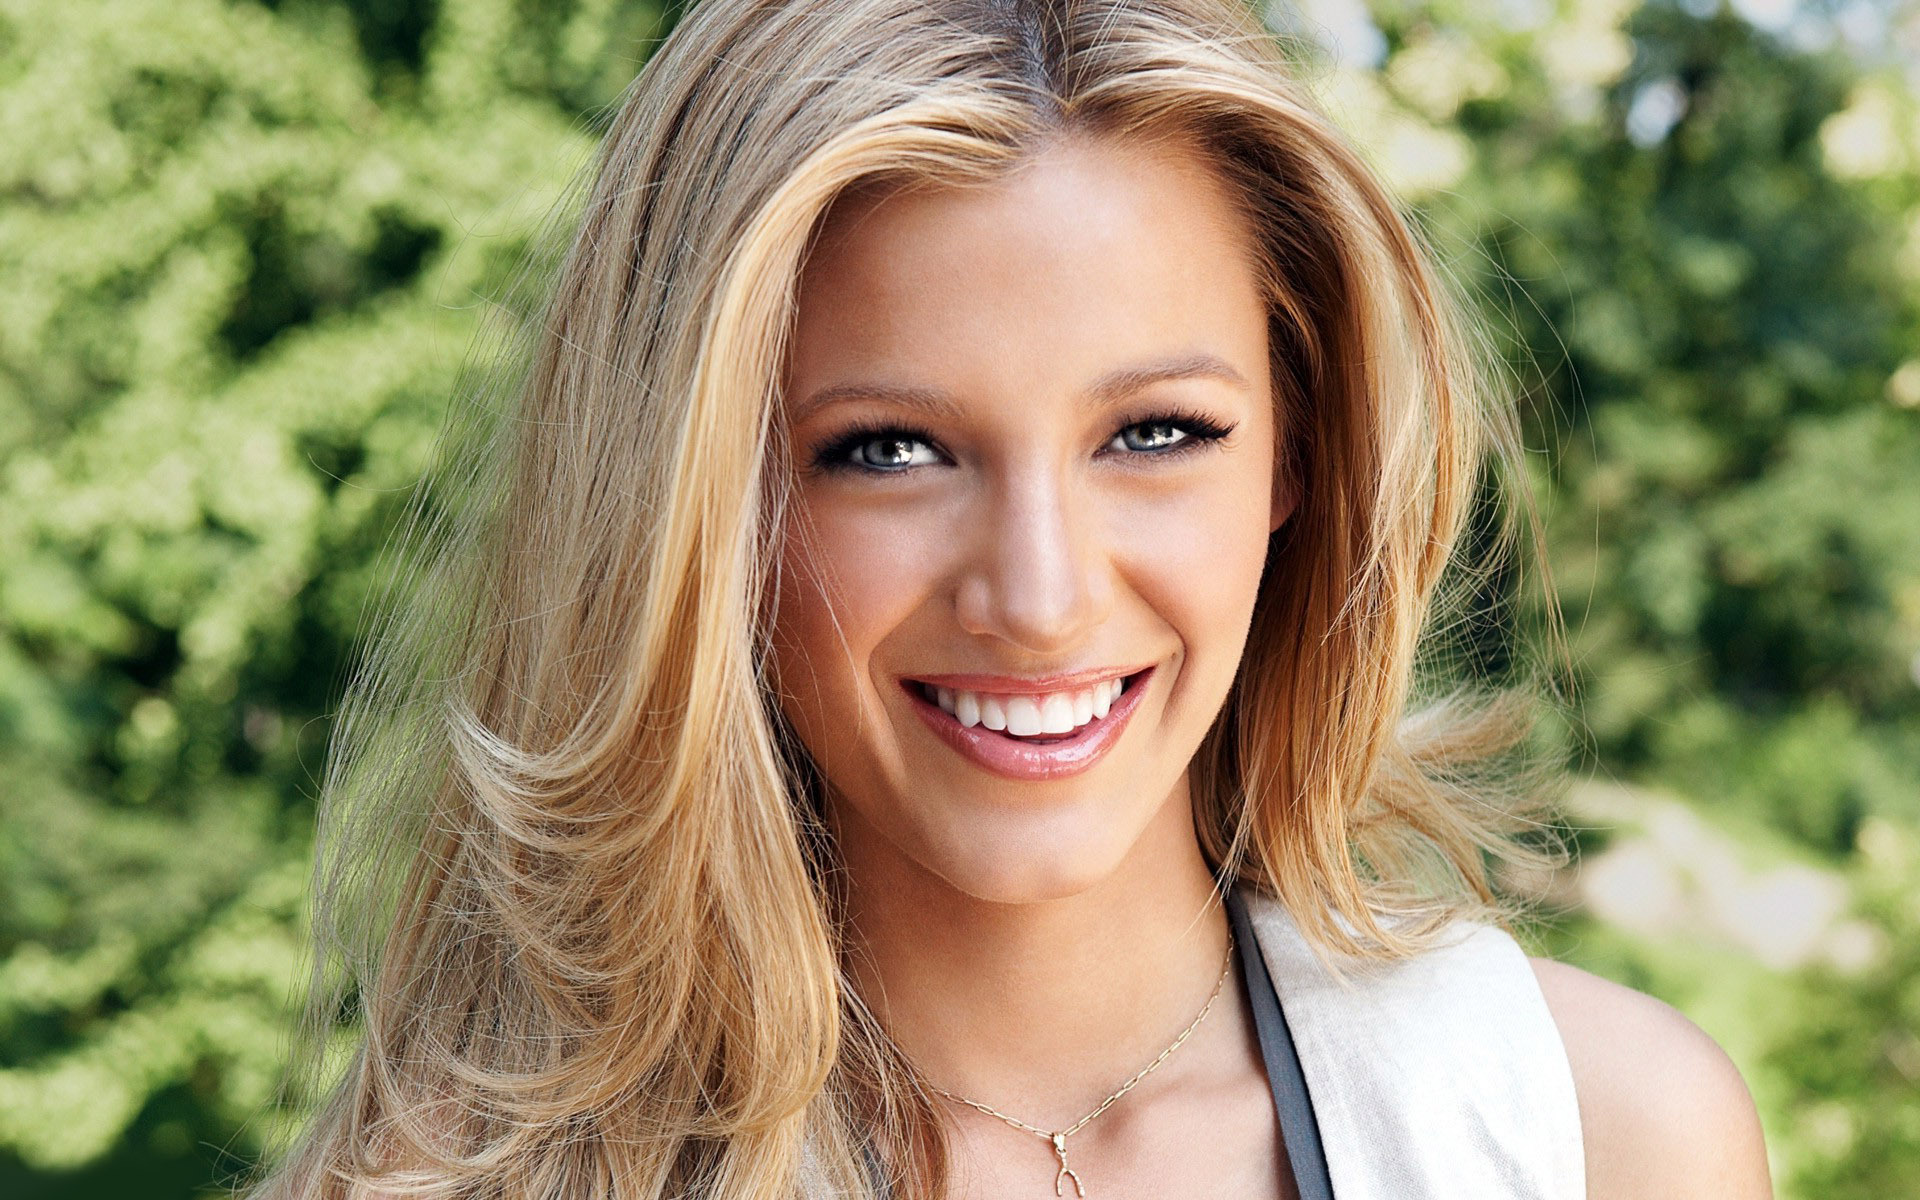 Blake Lively loving picture